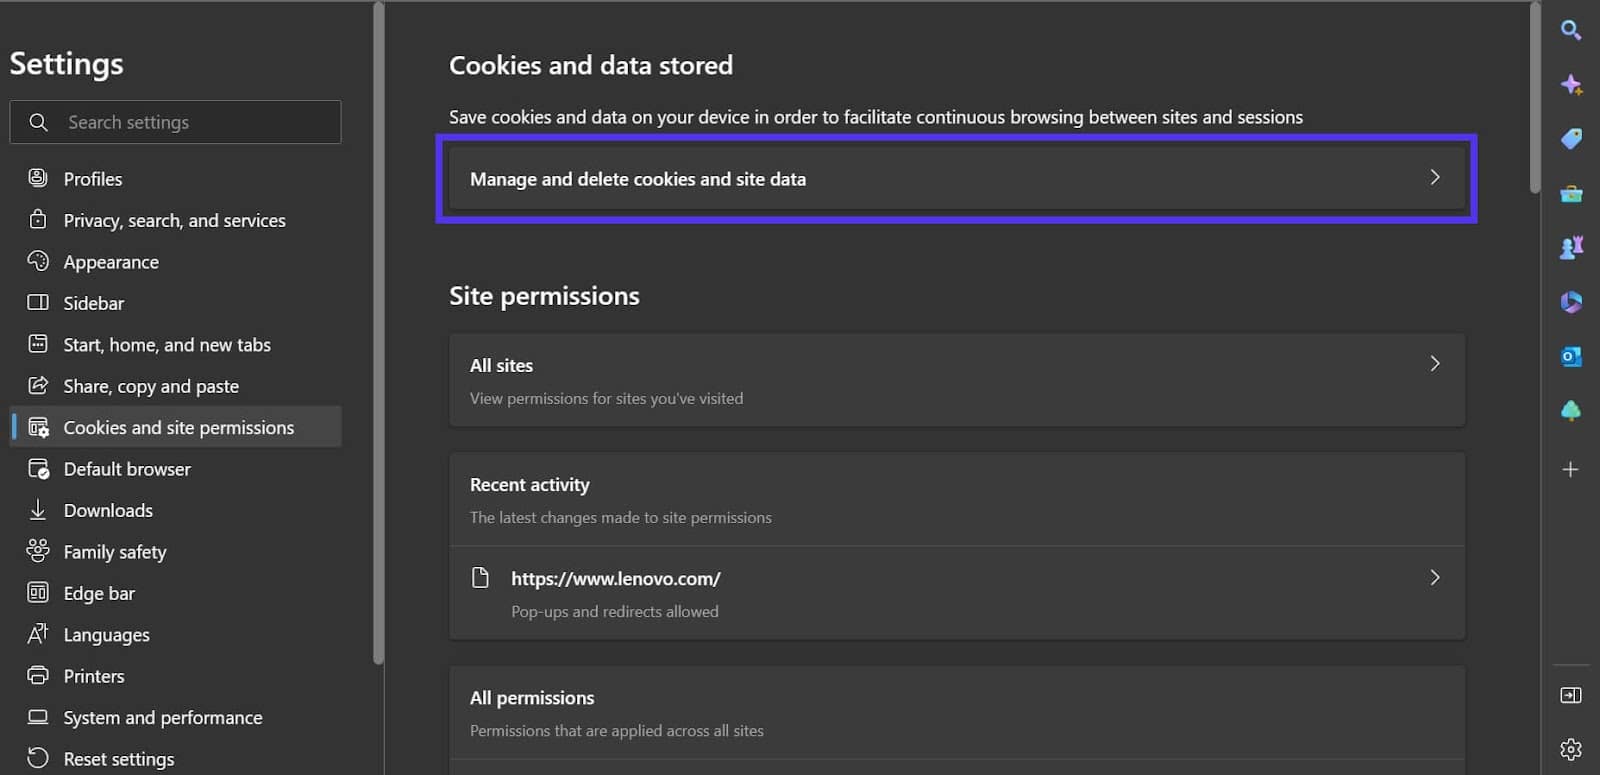 Manage and delete cookies in Microsoft Edge